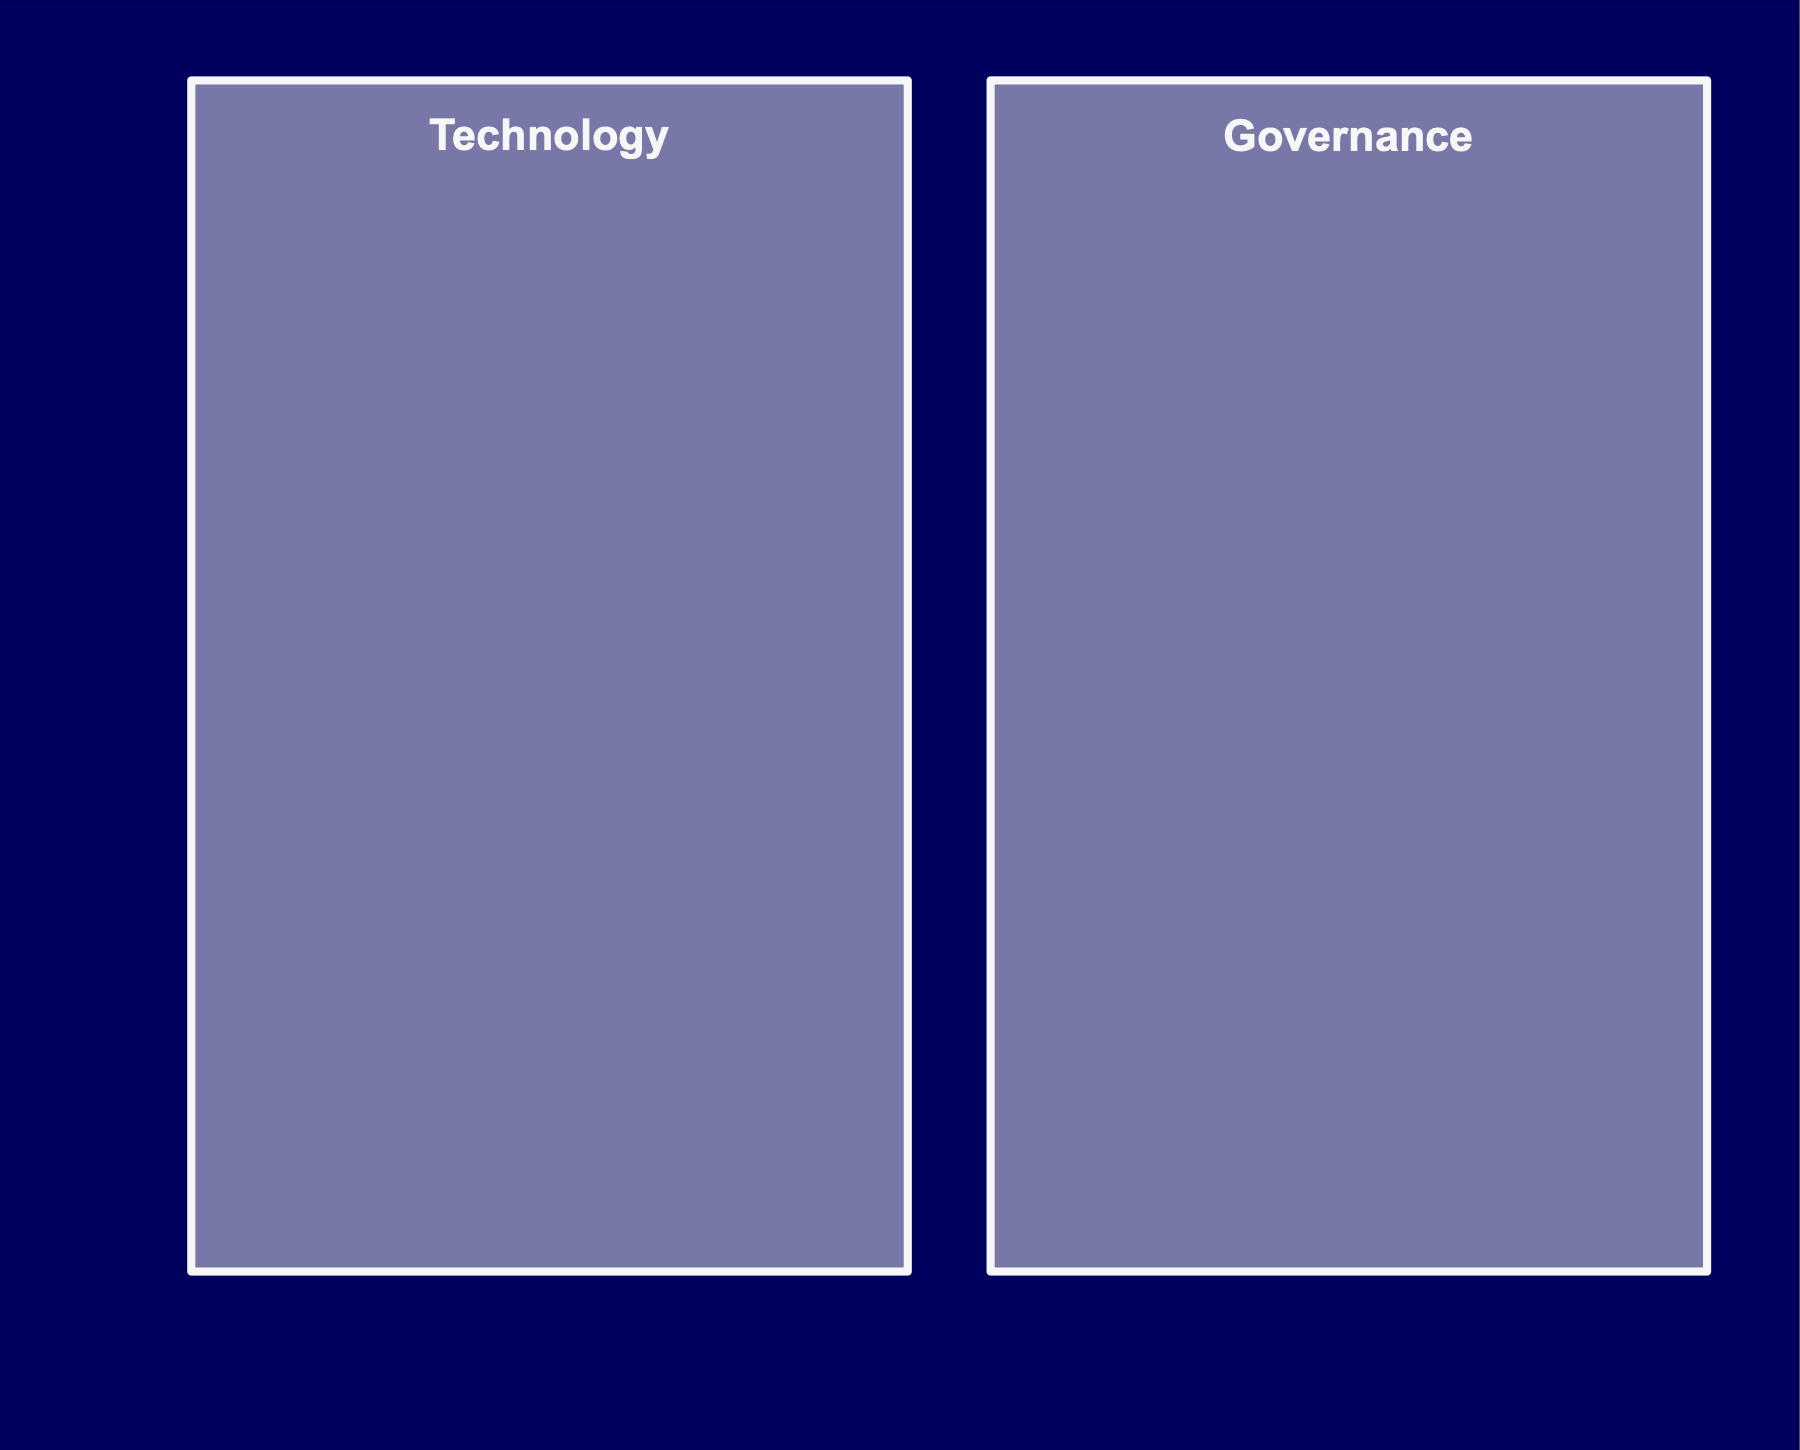 Two columns, one for technology, one for governance